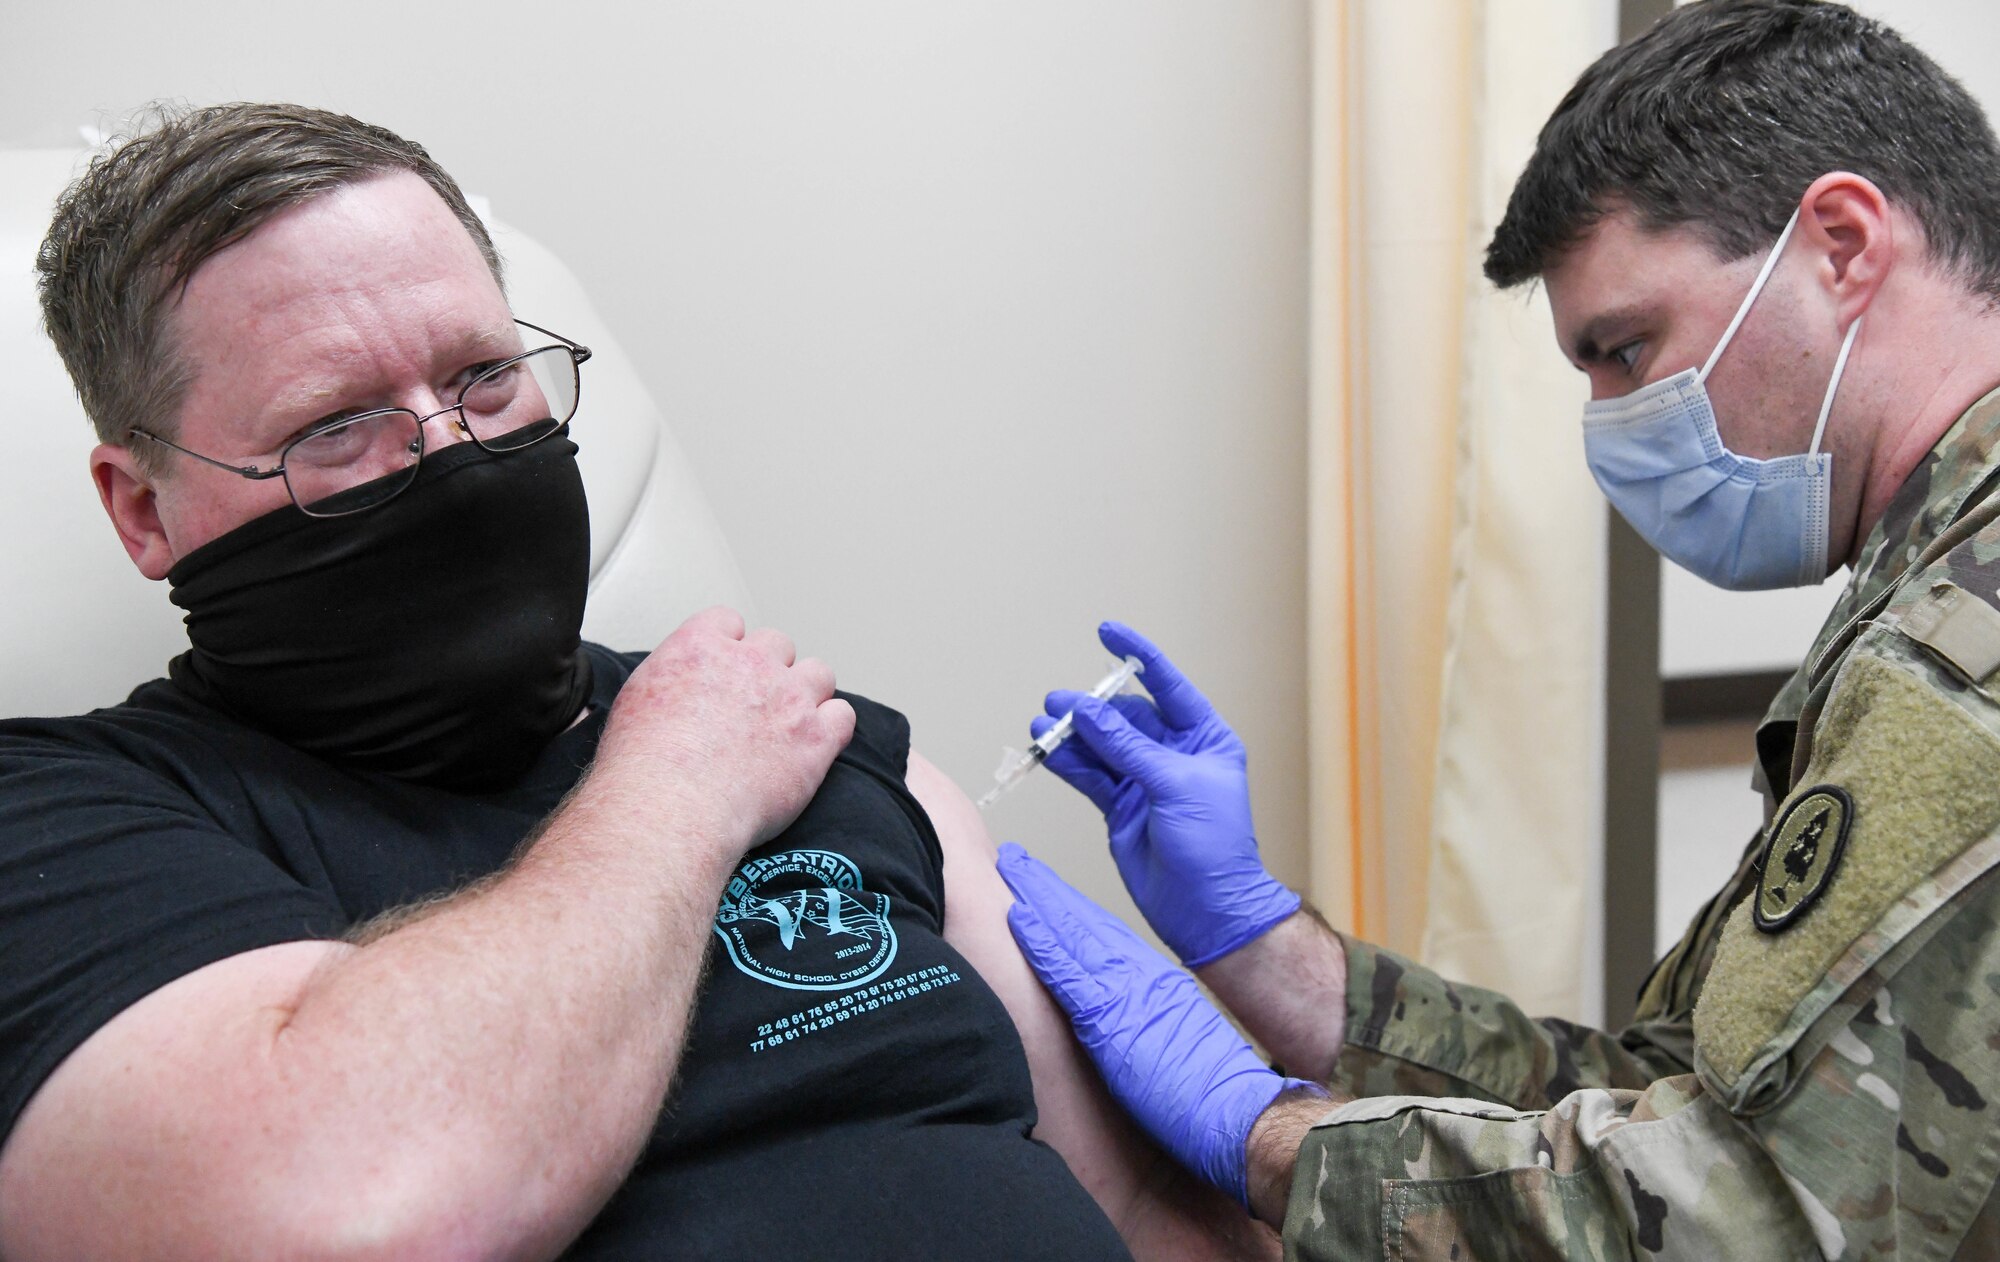 Sgt. Dillon Henderson with the Tennessee Army National Guard administers a COVID-19 vaccine to Michael Glennon, an Arnold Engineering Development Complex team member, at Arnold Air Force Base, Tenn., Feb. 23, 2021, at the Medical Aid Station on base. (U.S. Air Force photo by Jill Pickett)